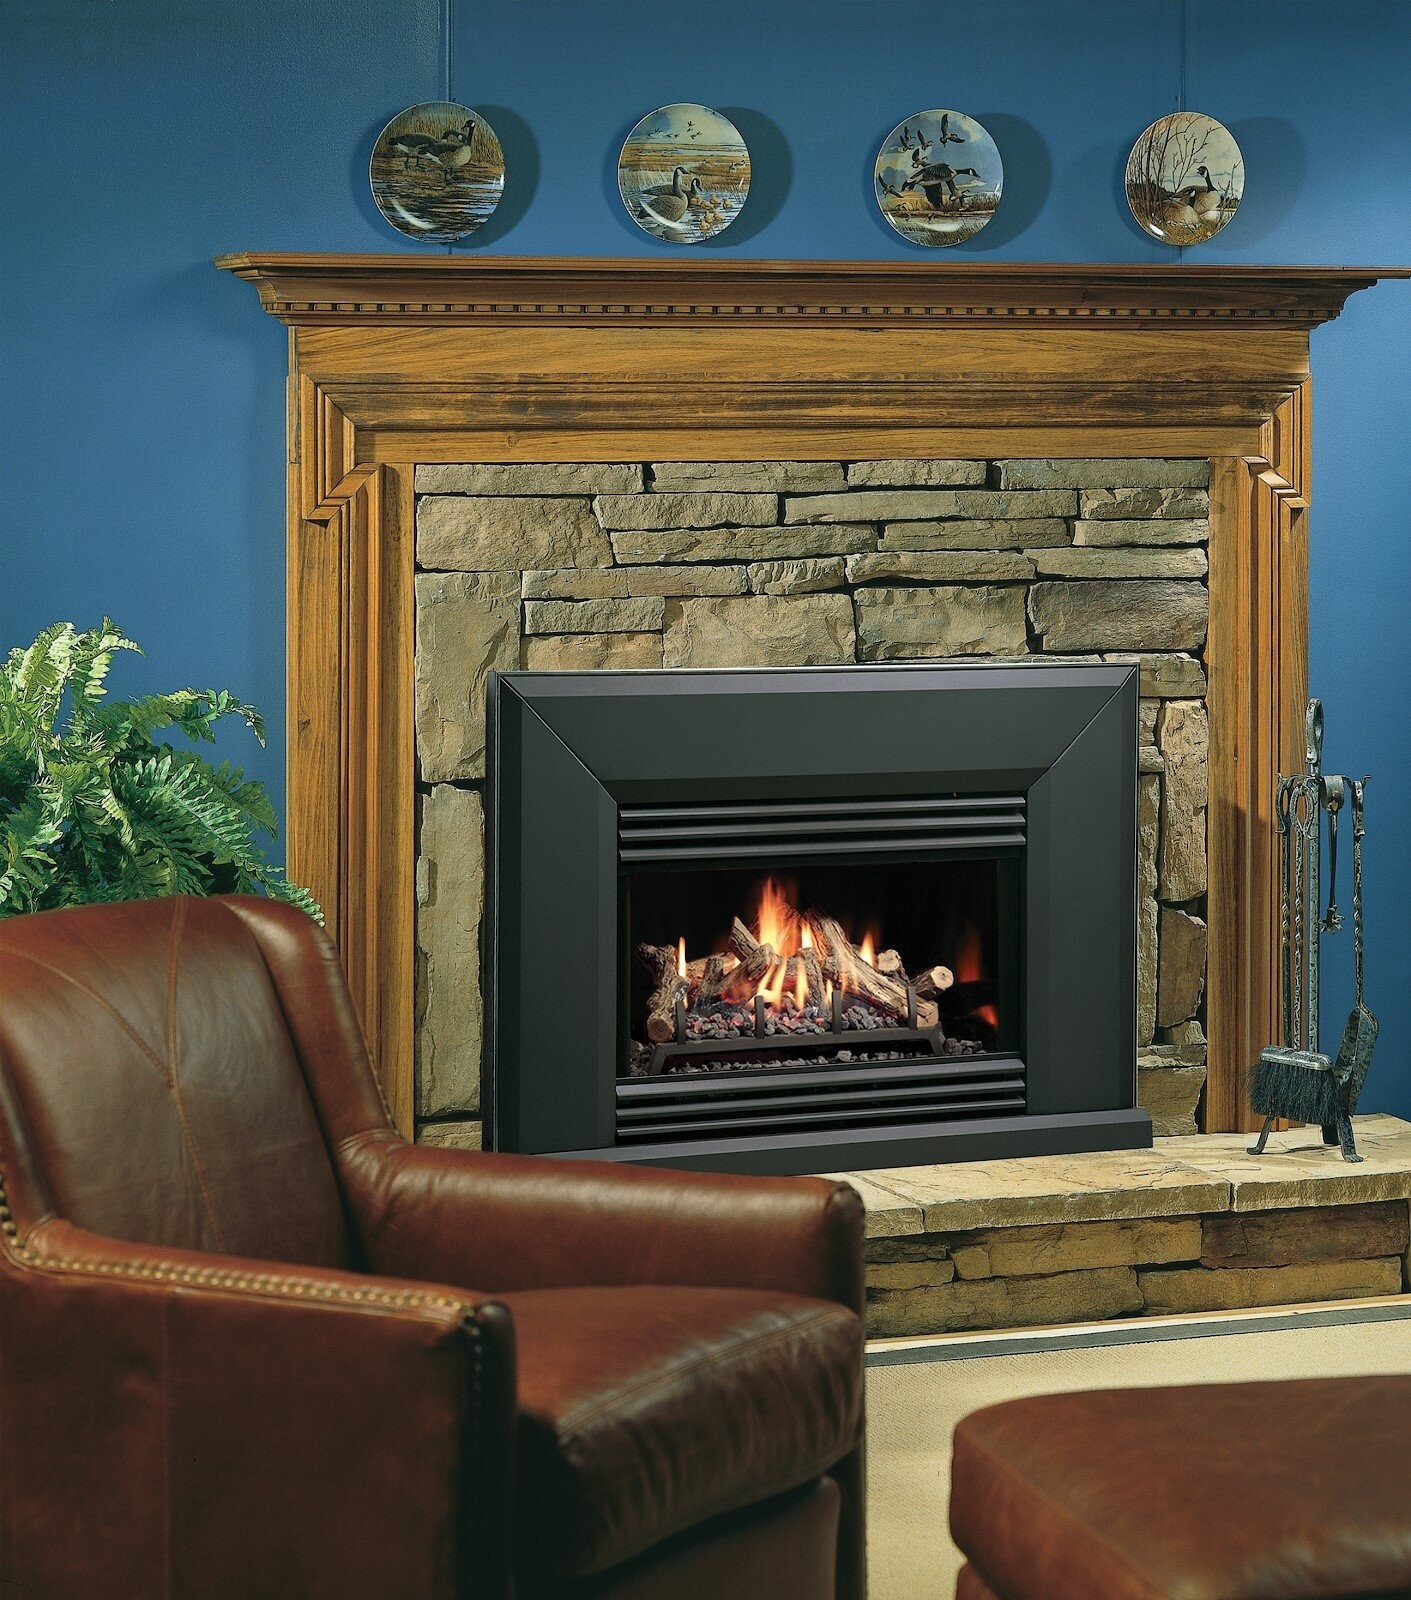 Enhance your fireplace with these cool, stylish fireplace covers